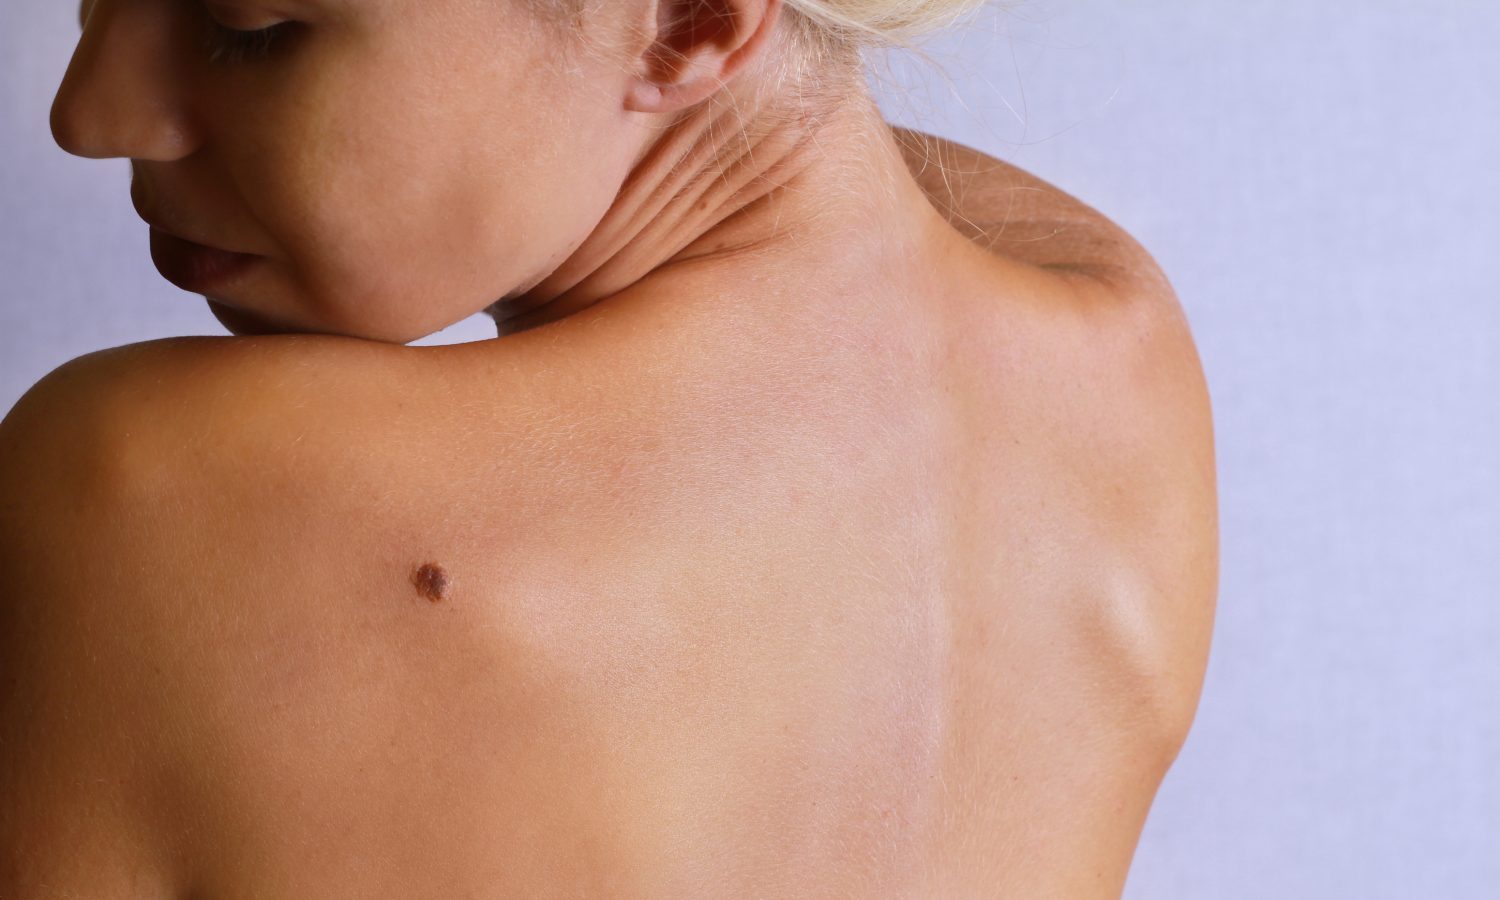 Top 10 Risk Factors Of Melanoma And How To Prevent It